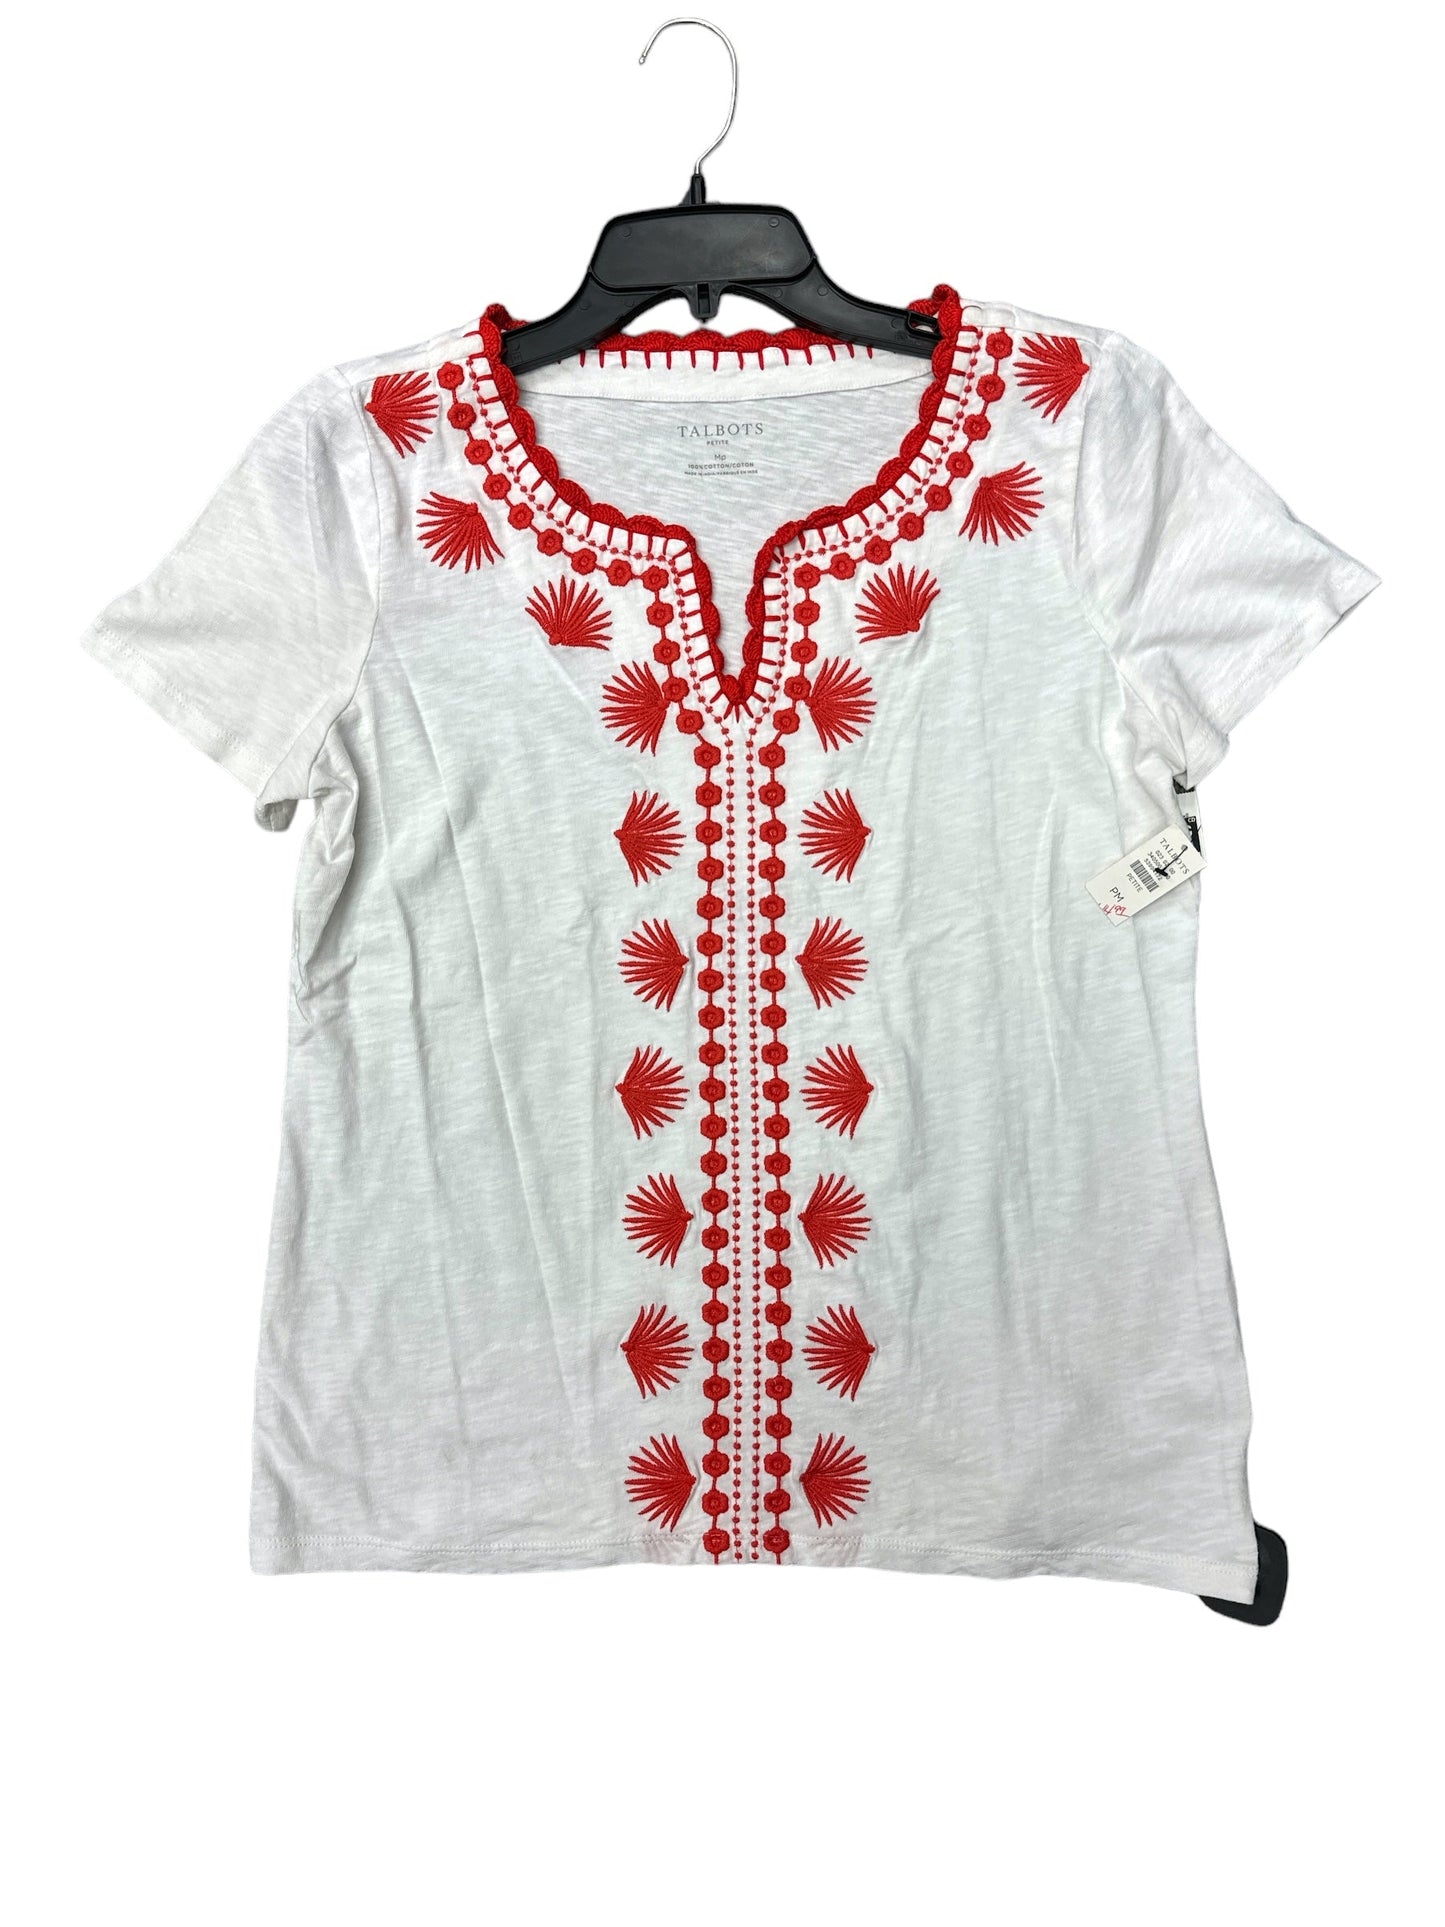 Red & White Top Short Sleeve Talbots, Size Petite  M